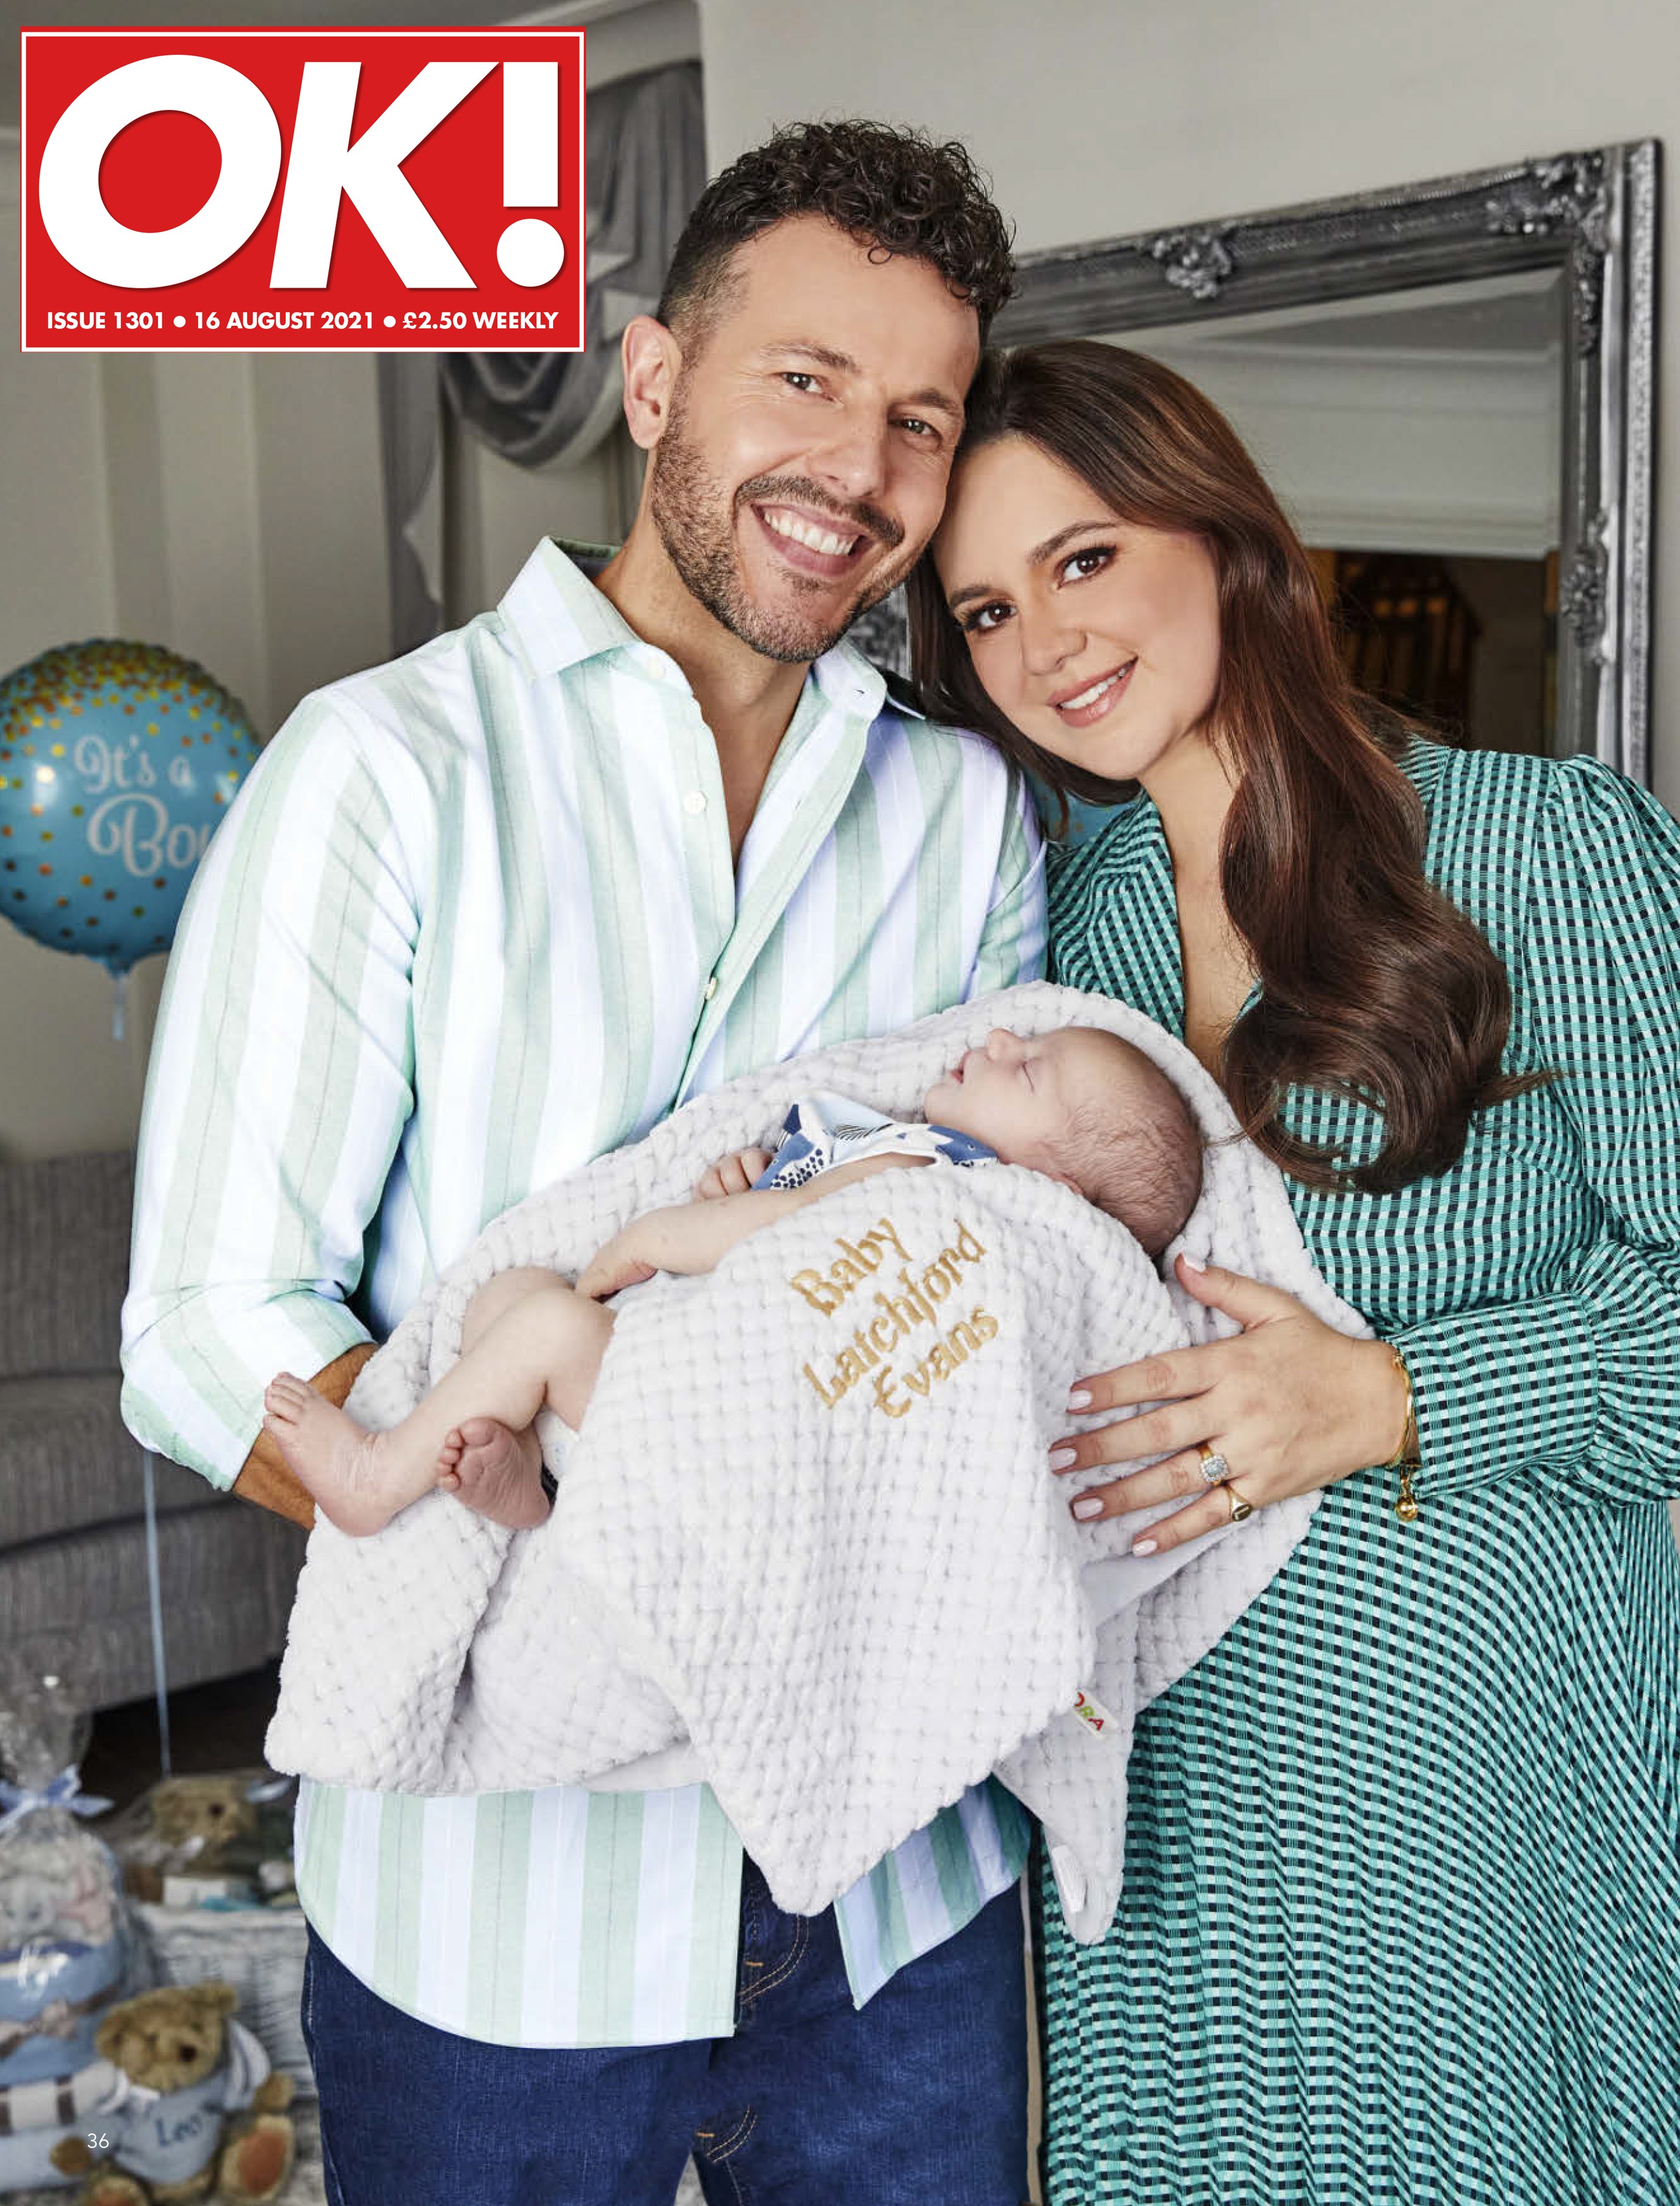 Cozy Crew Club Featured in OK! Magazine with Lee Latchford-Evans and wife Kerry-Lucy's baby reveal!